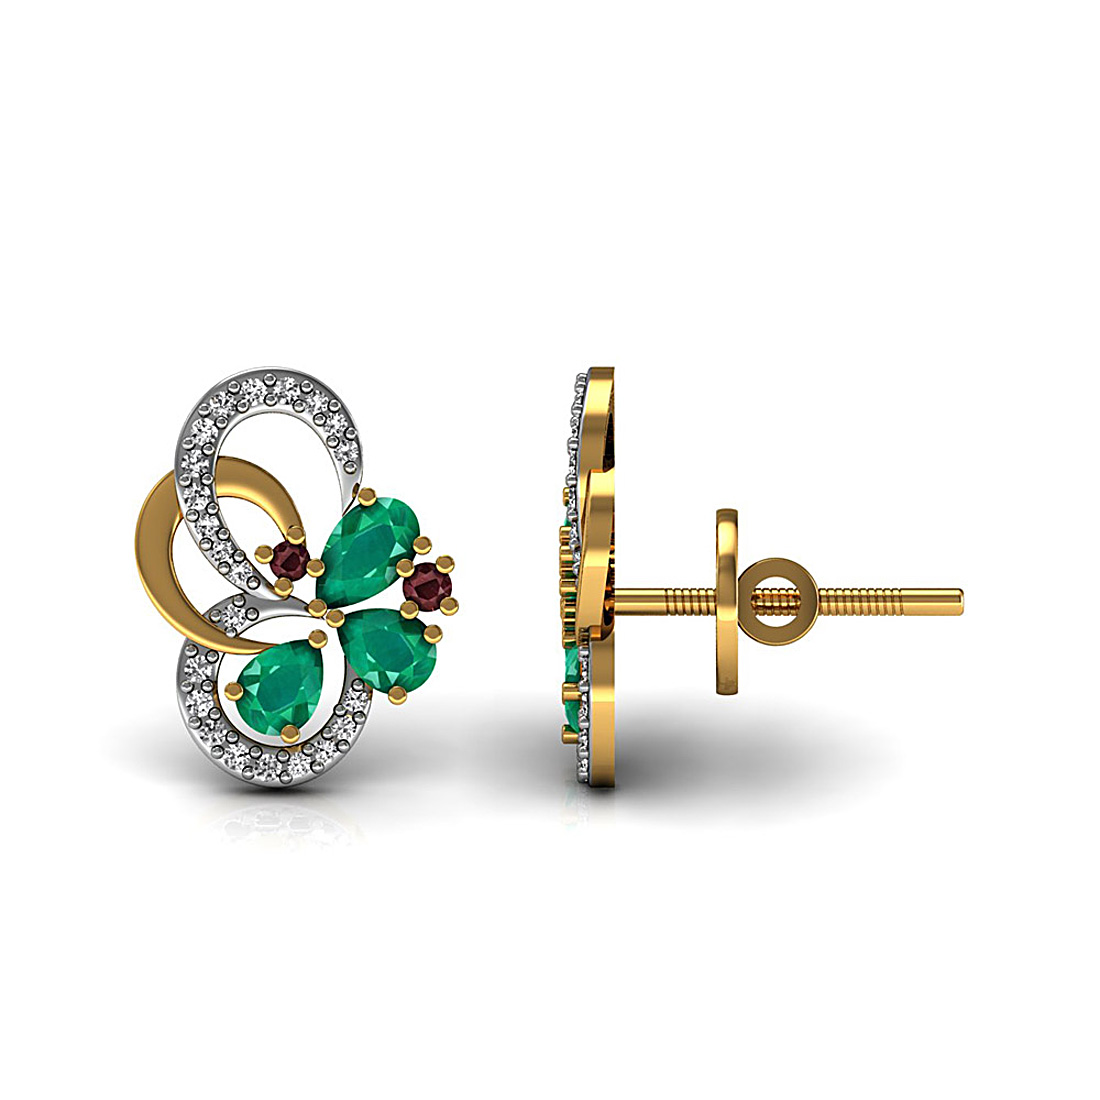 Stud earrings studded with natural emerald and ruby gemstone and made in 18k solid yellow gold.